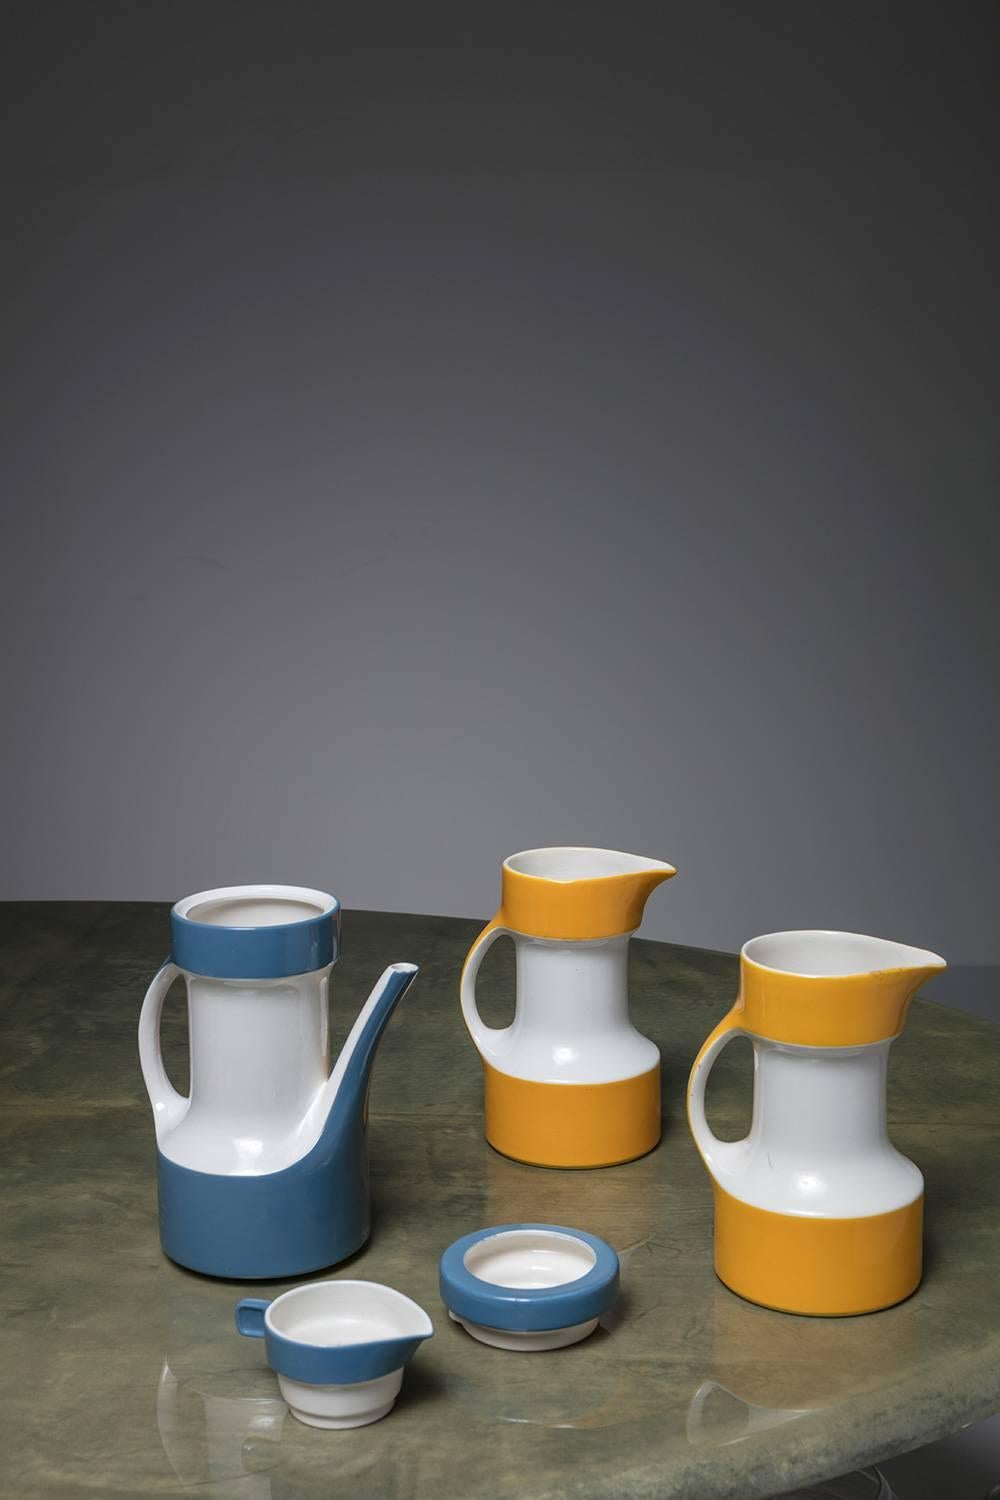 Set of three pitchers by Ceramica Pagnossin, Treviso.
Blue piece features an integrated cup with plate.